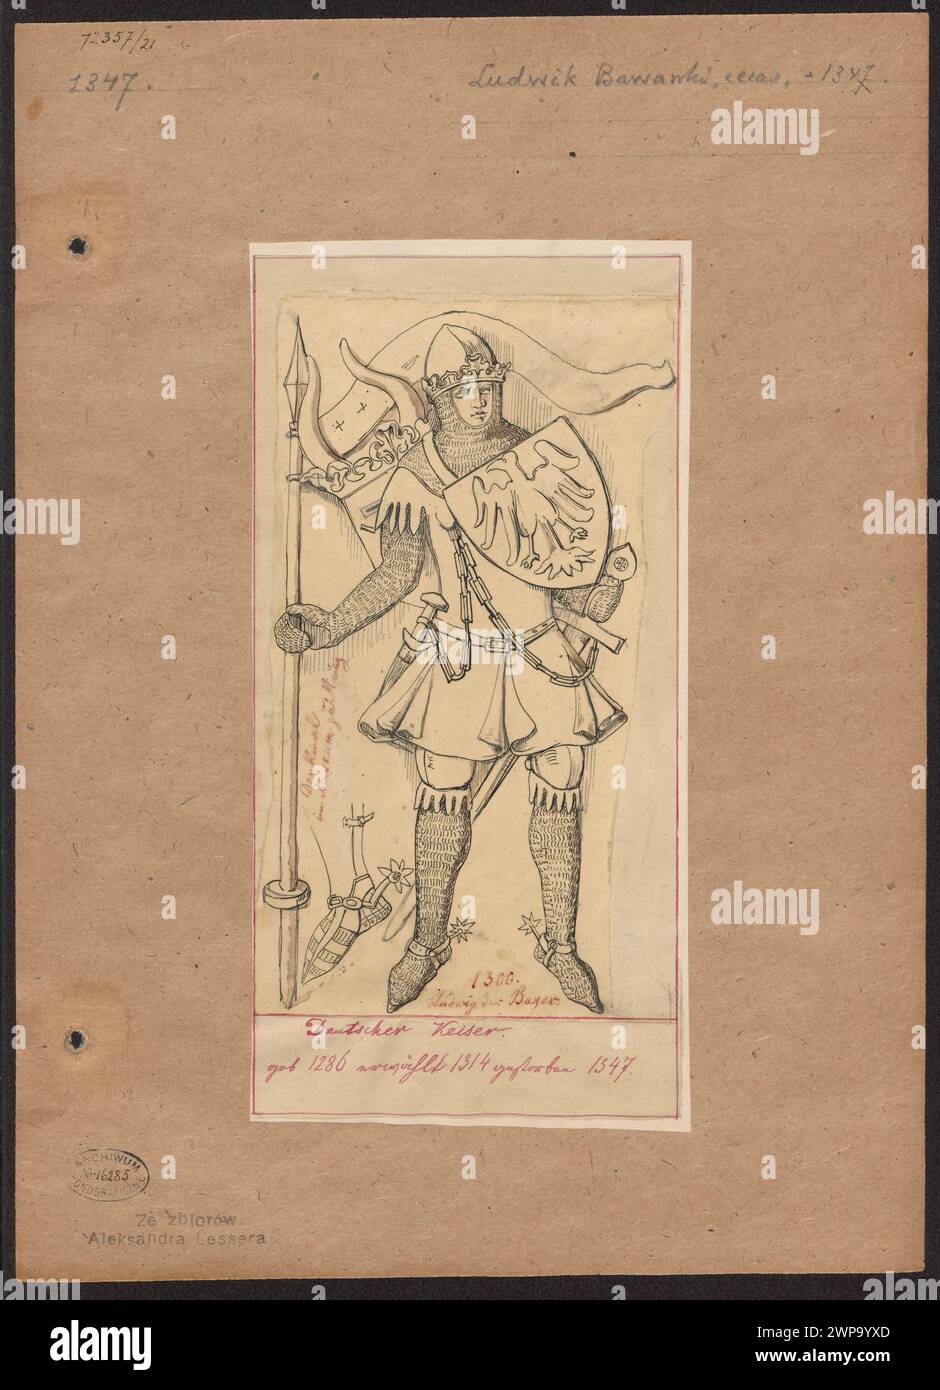 Emperor Ludwik IV Bavarski in a knight's costume and shields with a coat of arms, according to the one found at the Museum in Mainz; Lesser, Aleksander (1814-1884); 1830-1884 (1830-00-00-1884-00-00);Lesser, Aleksander (1814-1884), Lesser, Aleksander (1814-1884) - collections, Lesser, Wiktor Stanisław Zygmunt (Baron - 1853-1935), Lesser, Wiktor Stanisław Zygmunt (Baron - 1853-1935) - collection, Ludwik IV. (Roman-German emperor-1287-1347), Ludwik IV (Roman-German emperor-1287-1347)-iconography, Germany, XIV century, emperors, gift (provenance), coats of arms, personalities, foreign personalitie Stock Photo